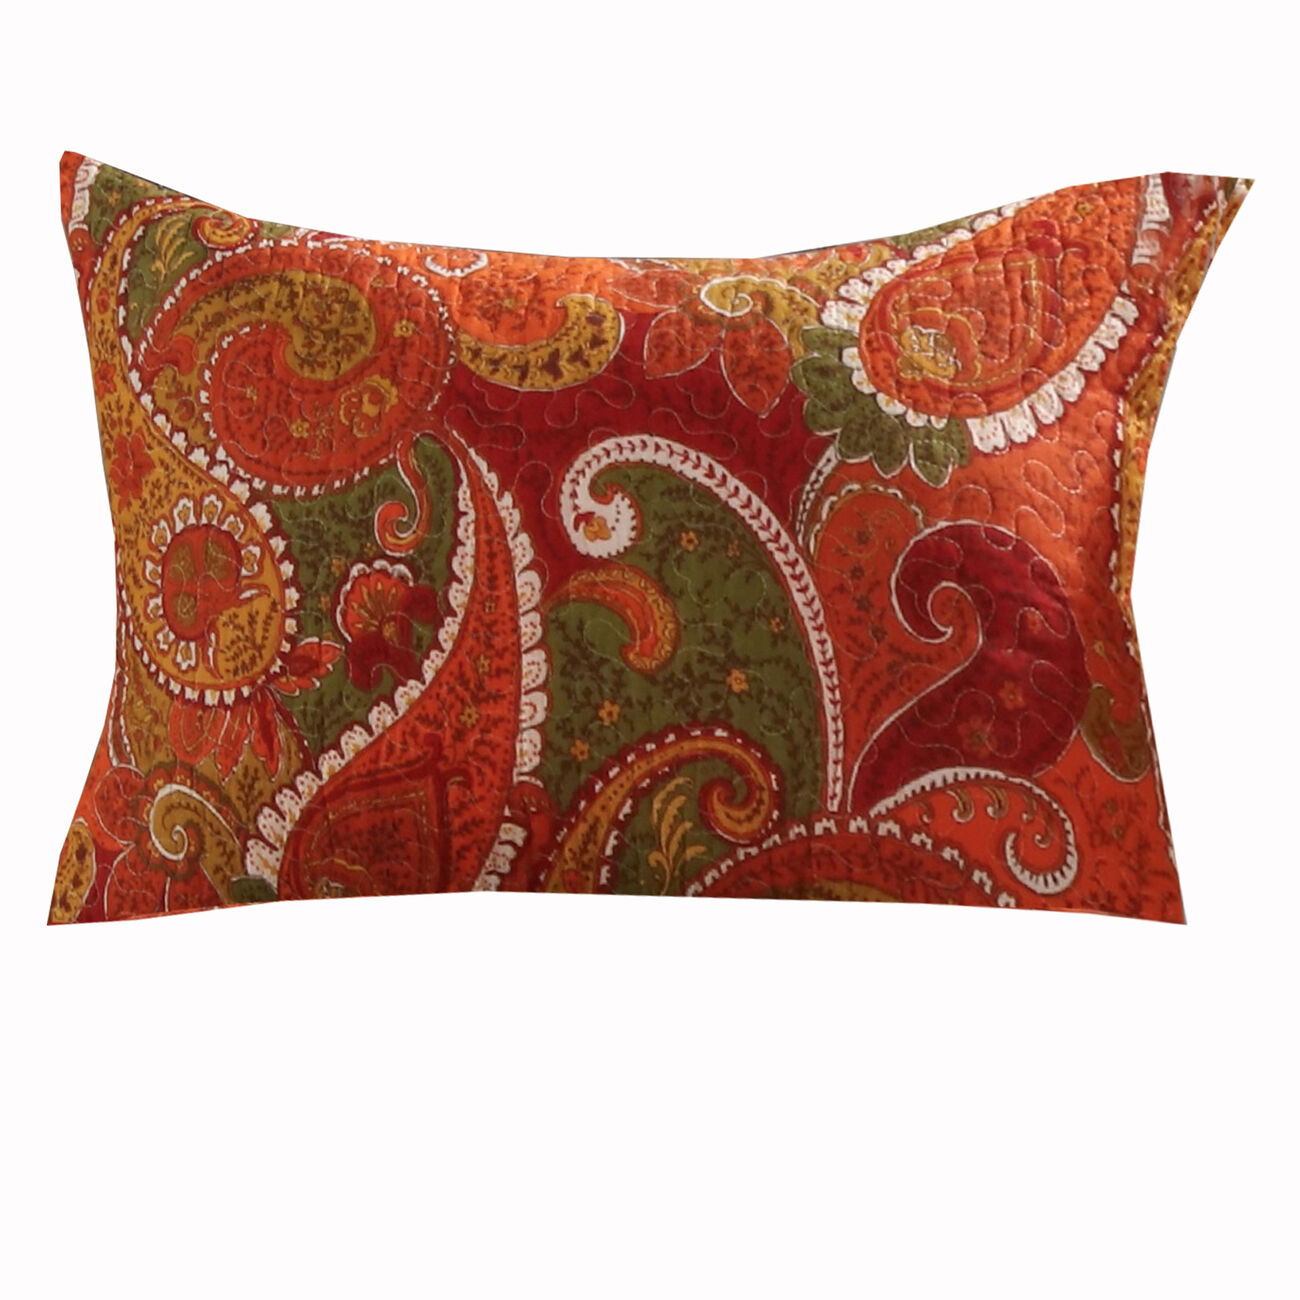 36 x 20 Polyester King Size Pillow Sham with Paisley Print, Cinnamon Red